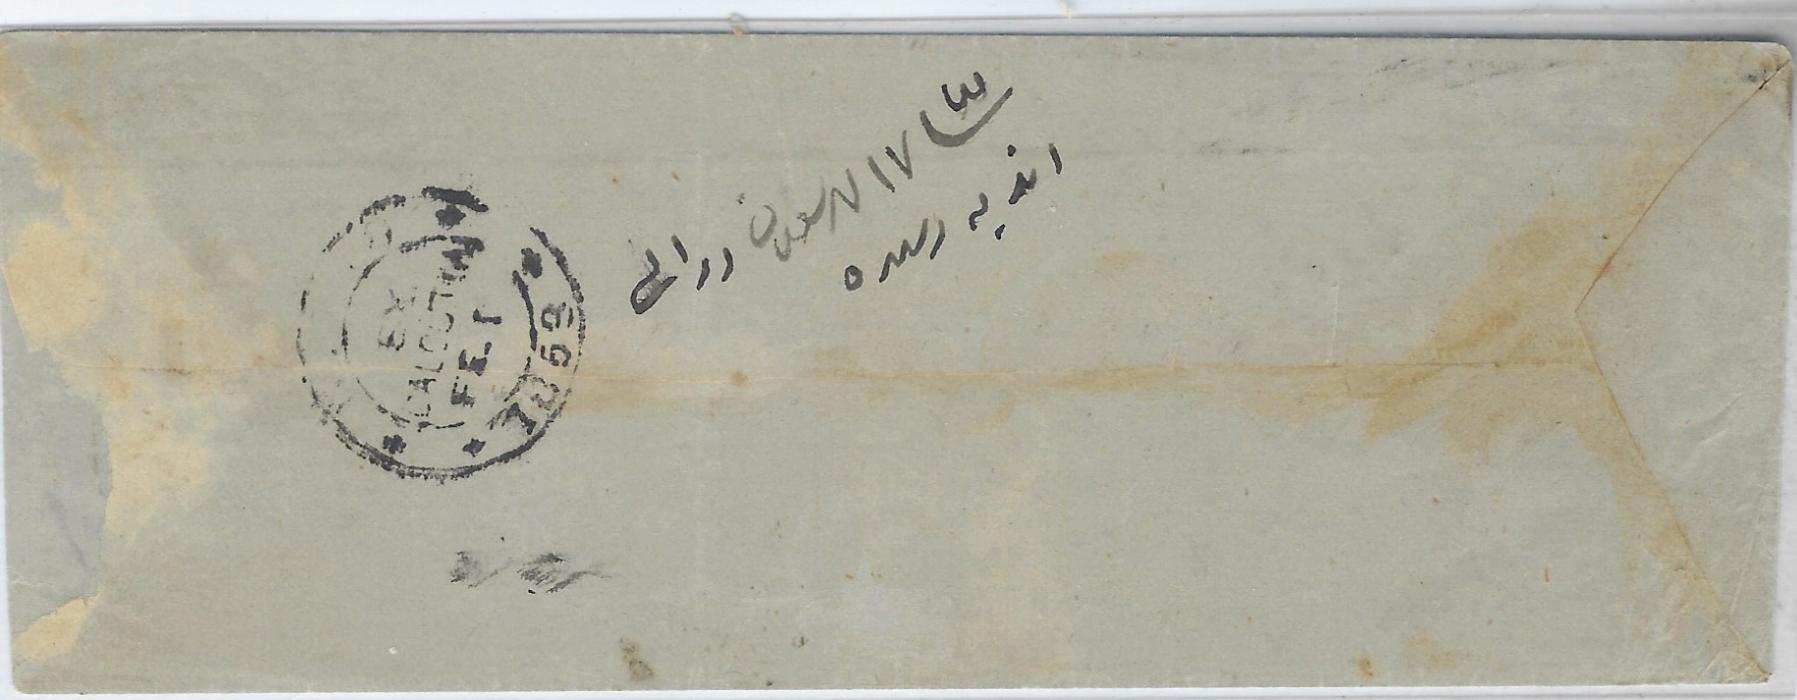 India 1853 (Feb) small cover to Rangoon, Burma bearing double circle Ex/ Calcutta date stamp on reverse, the front carries endorsement “Pr Str India”; good condition.